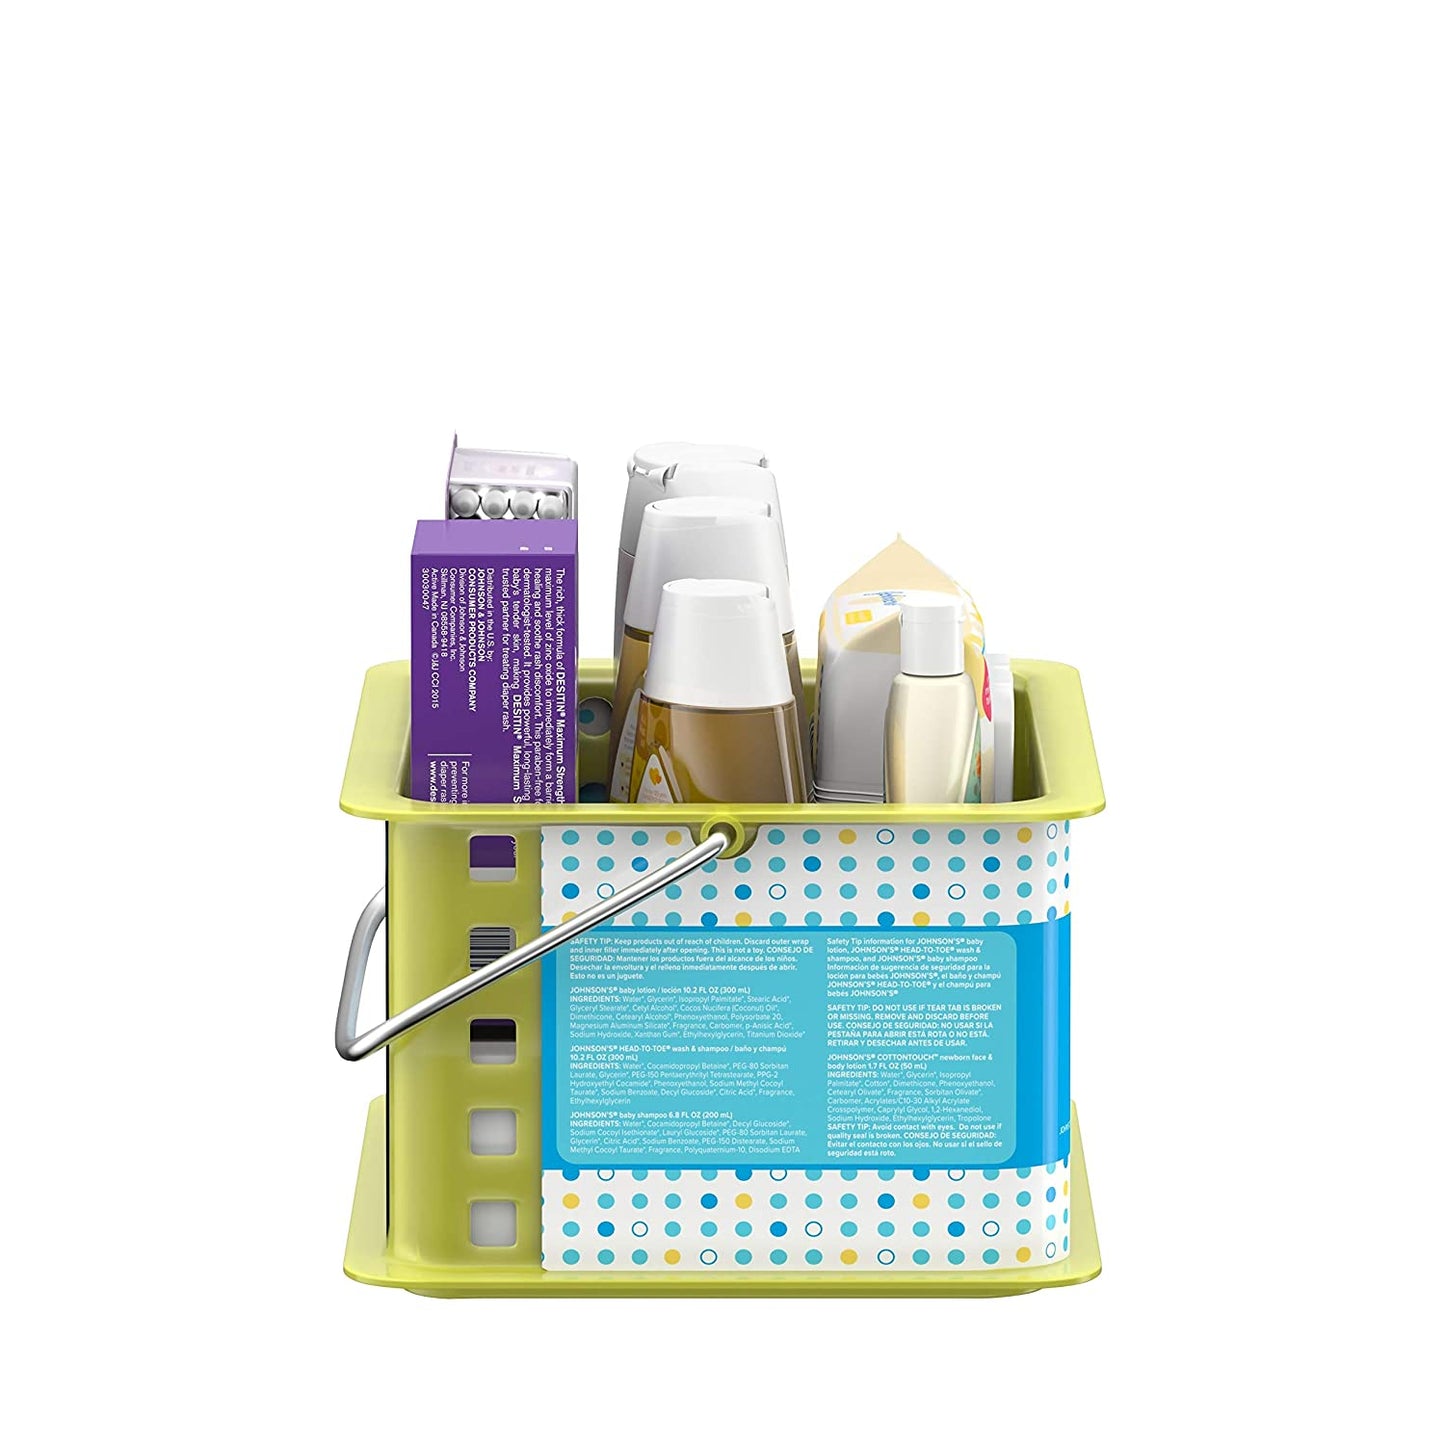 Discovery Gift Set for Parents-to-Be,